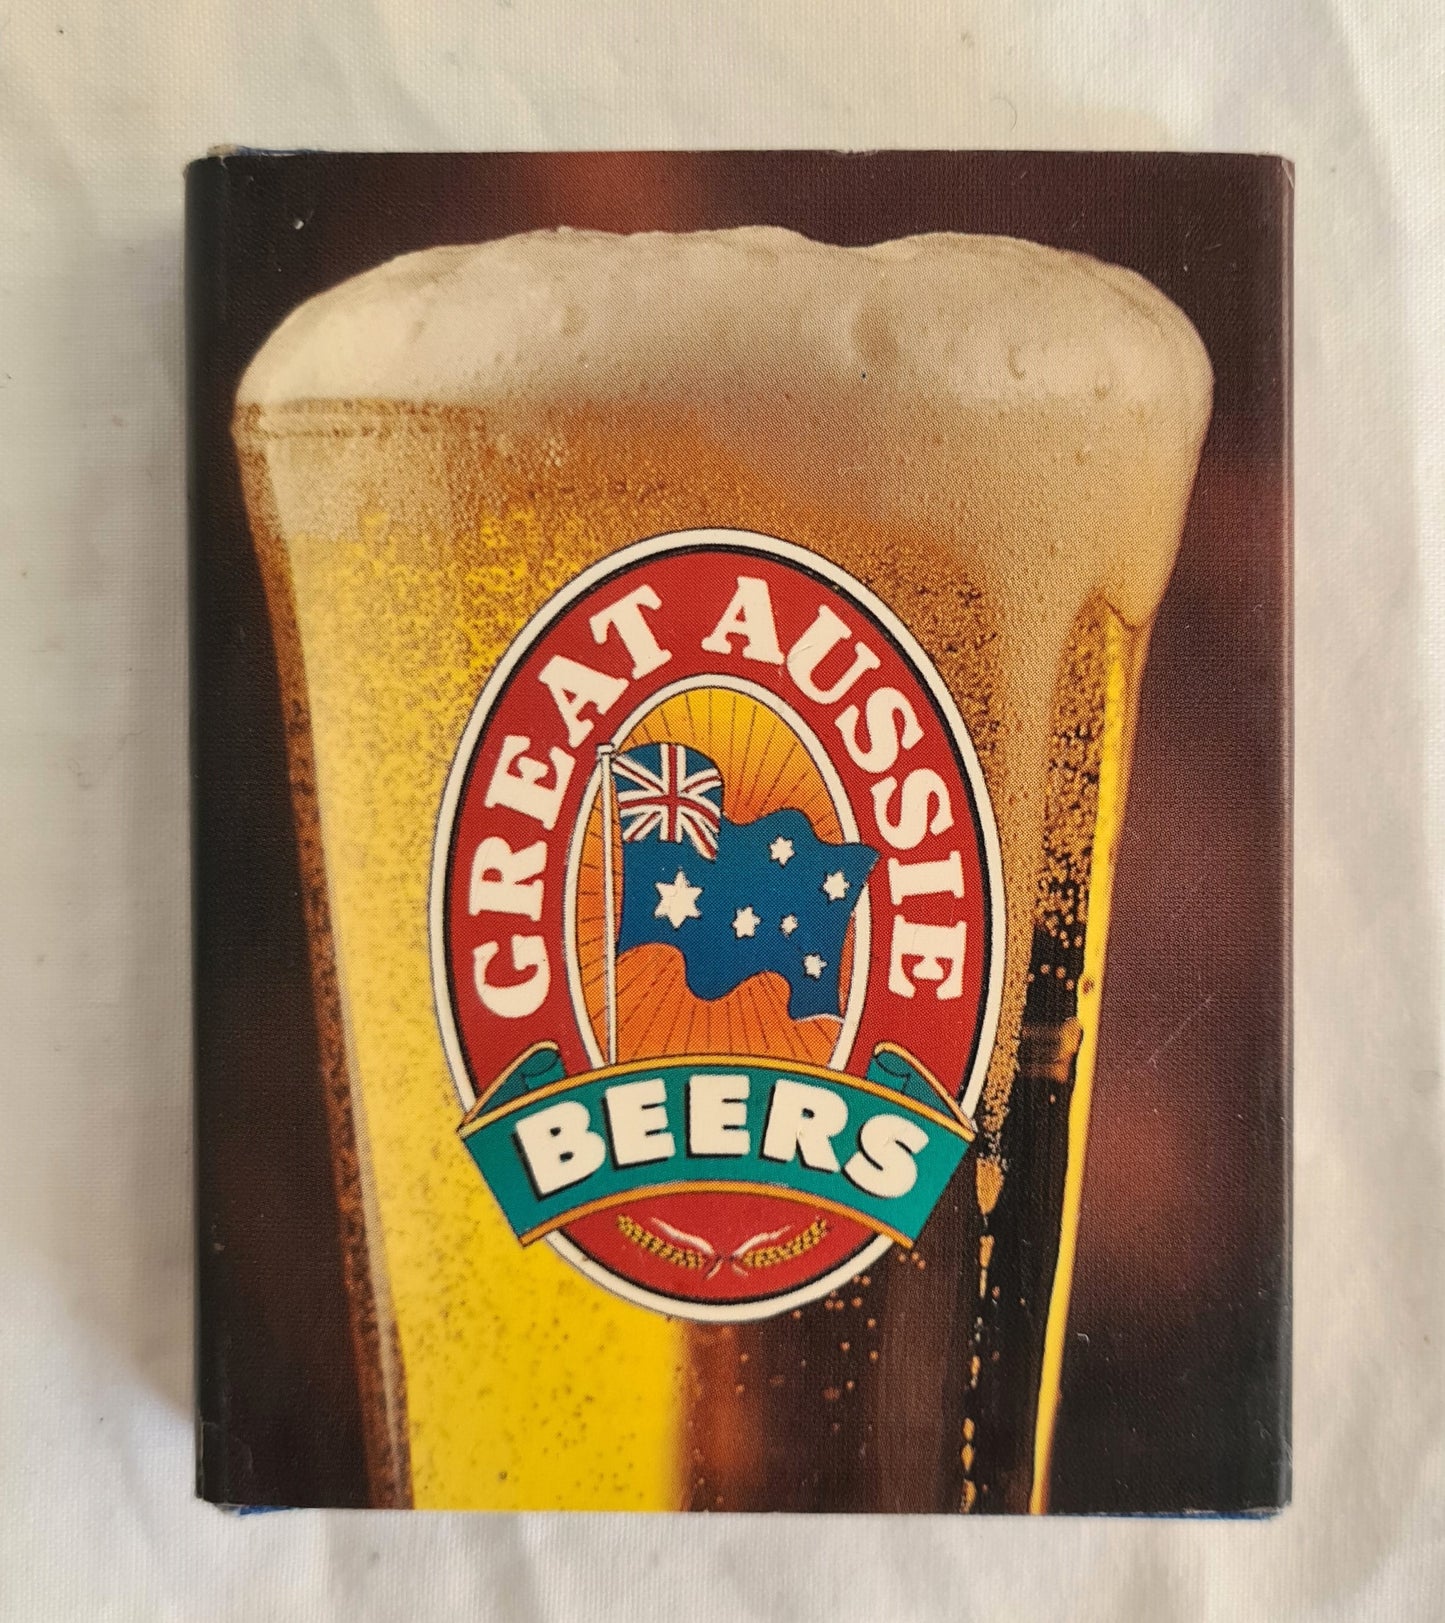 Great Aussie Beers by Barbara Whiter